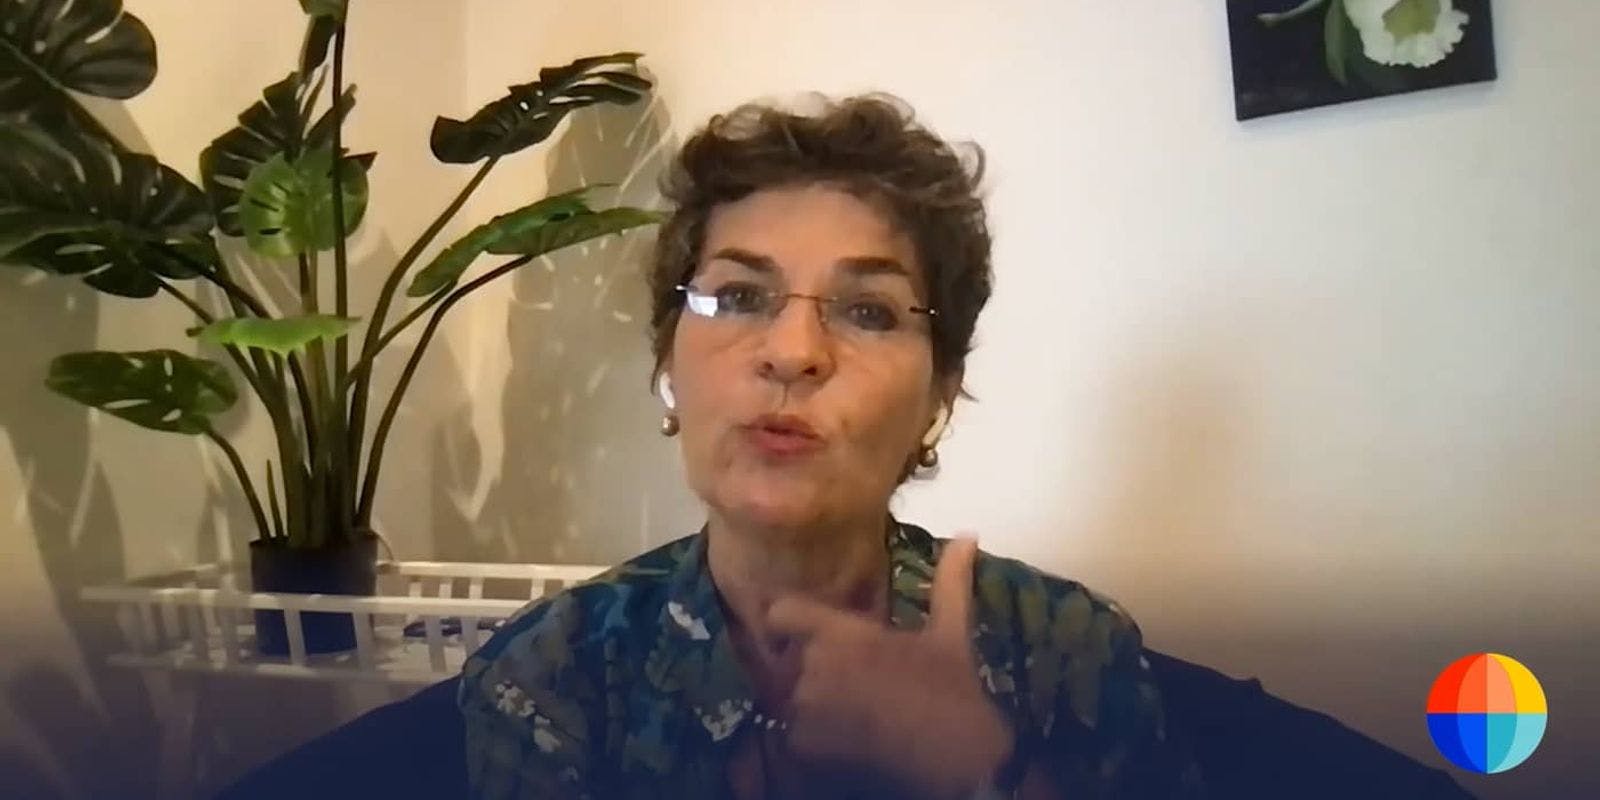 Frame of video showing Christina Figueres speaking